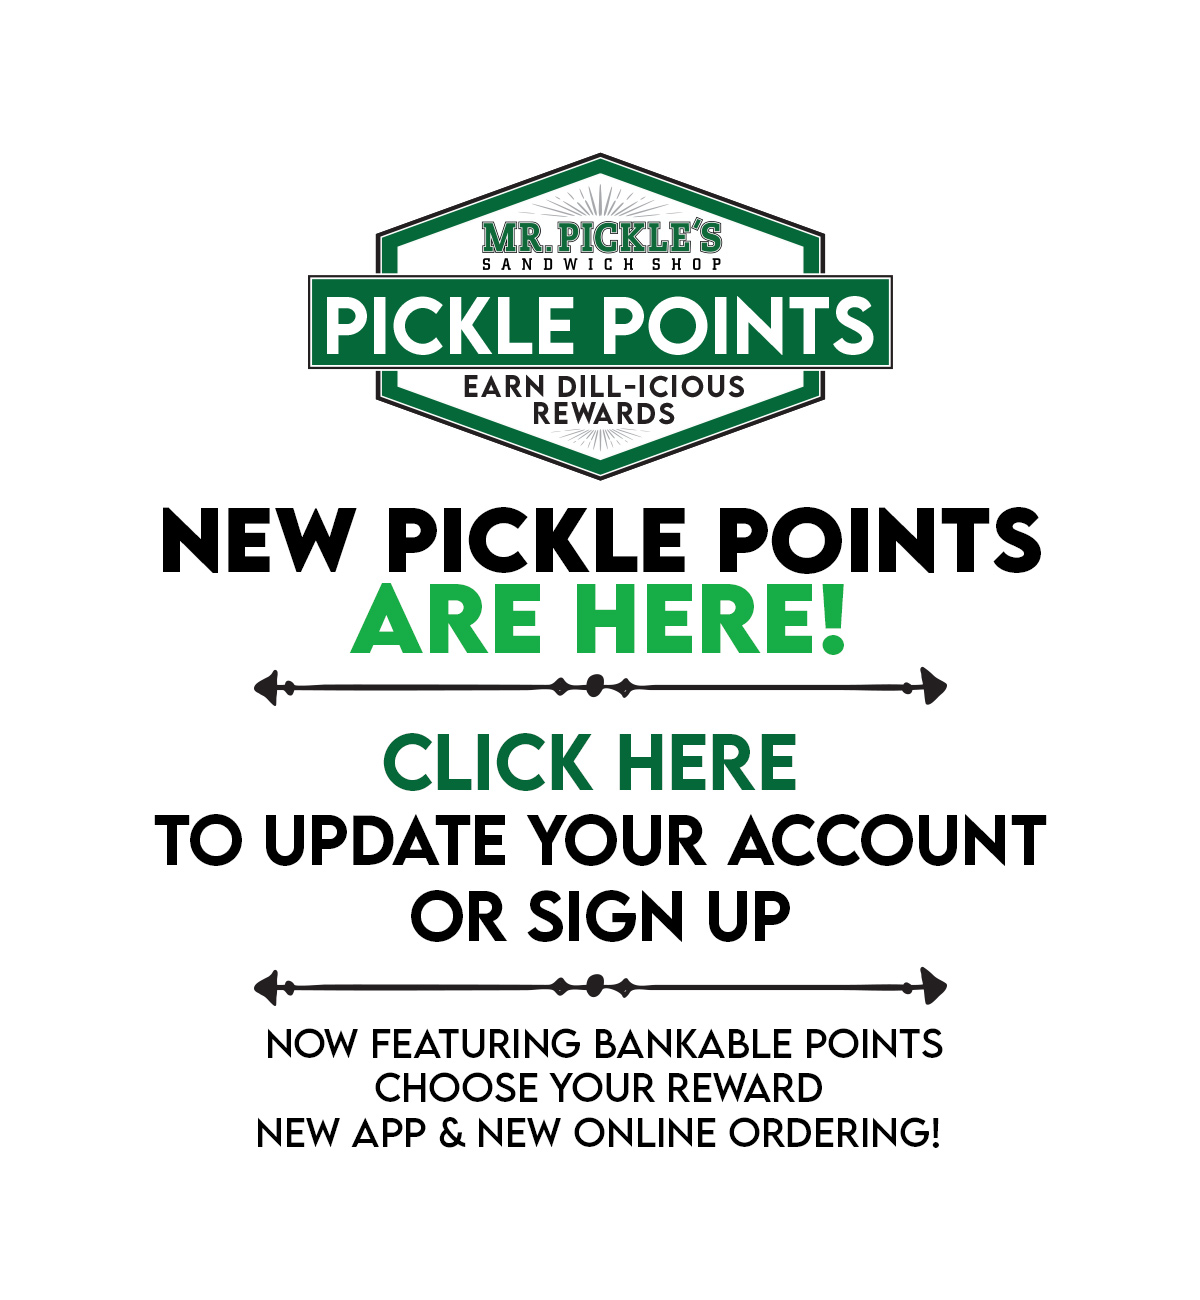 New Pickle Points are here click here to update your account or sign up